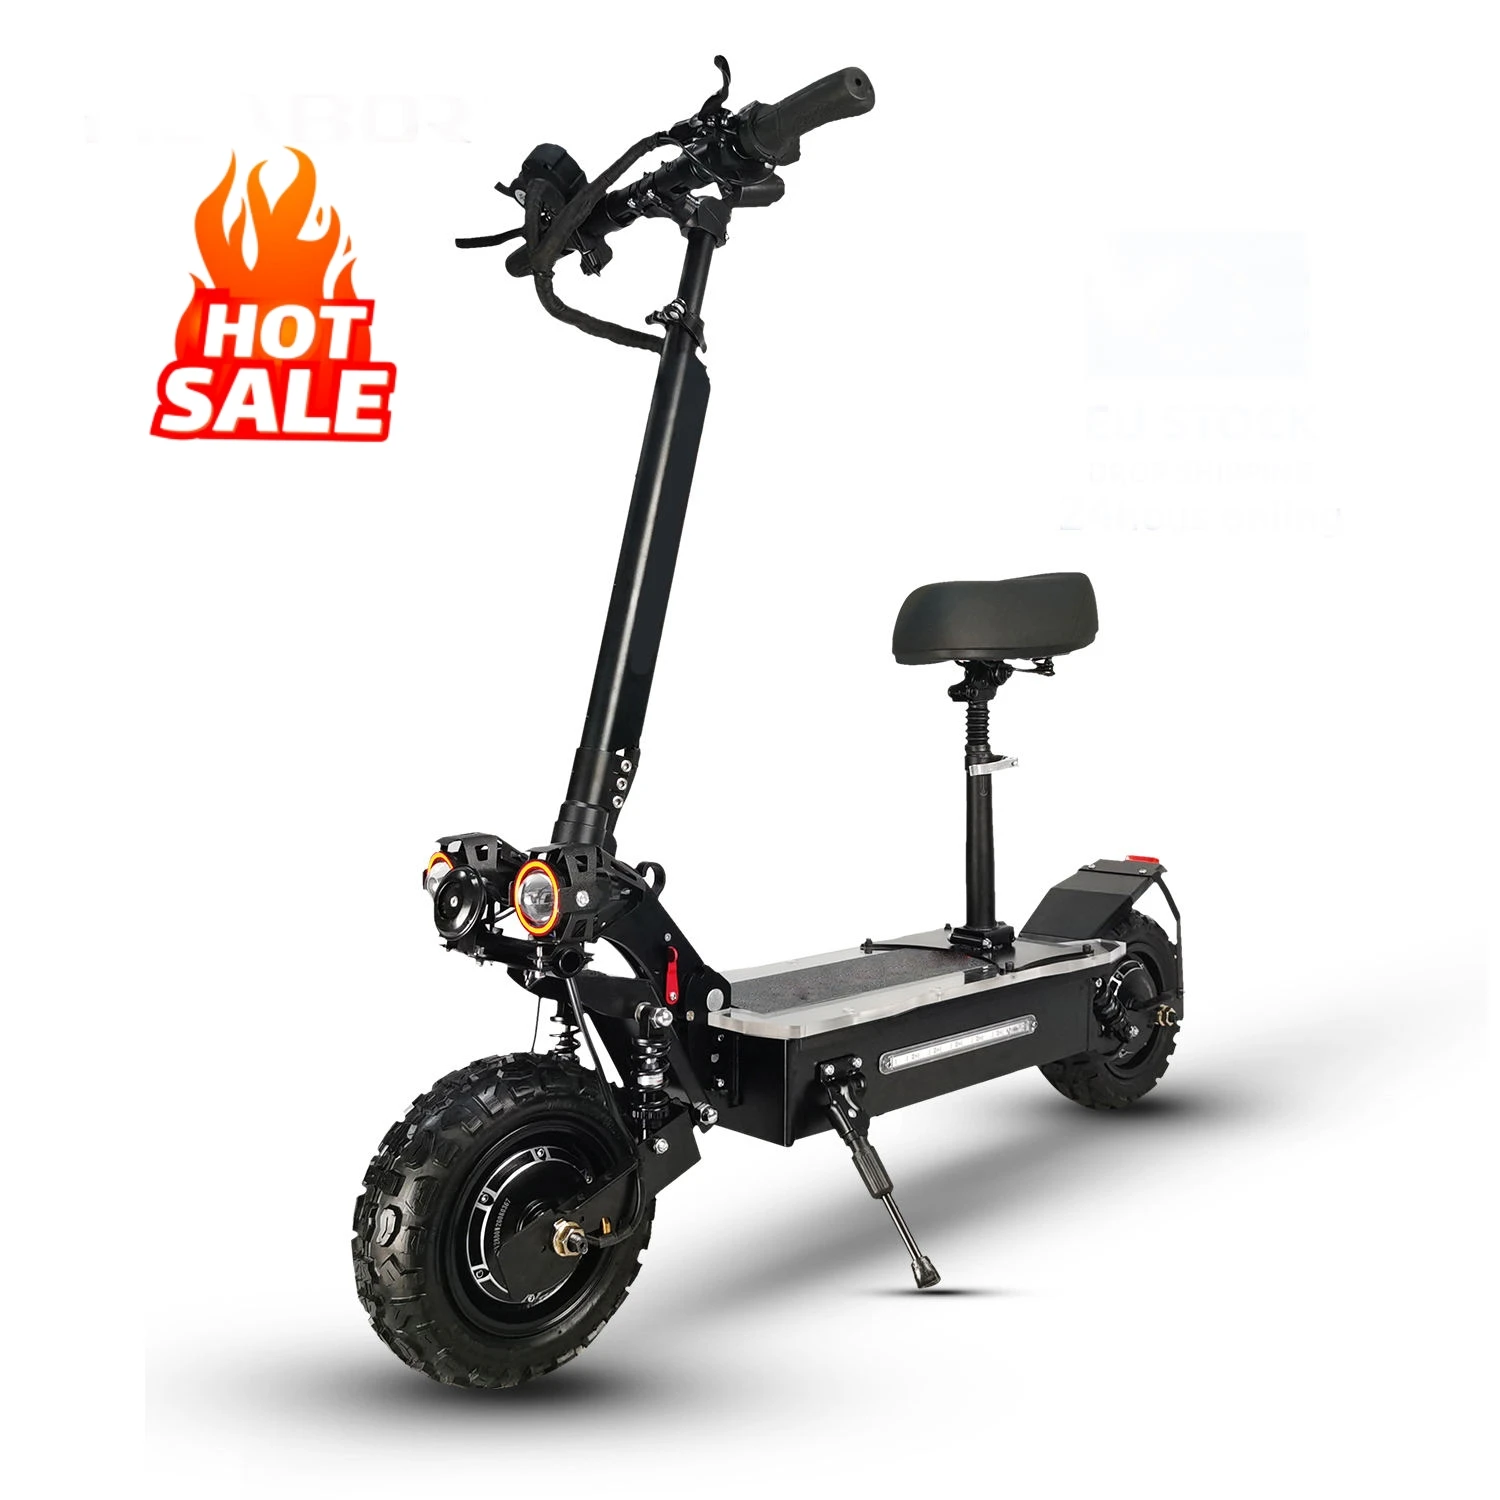 

USA warehouse high speed 70kmh 75kmh long range 80km 5600w 2 wheel Fat Tire Electric Scooter with seat